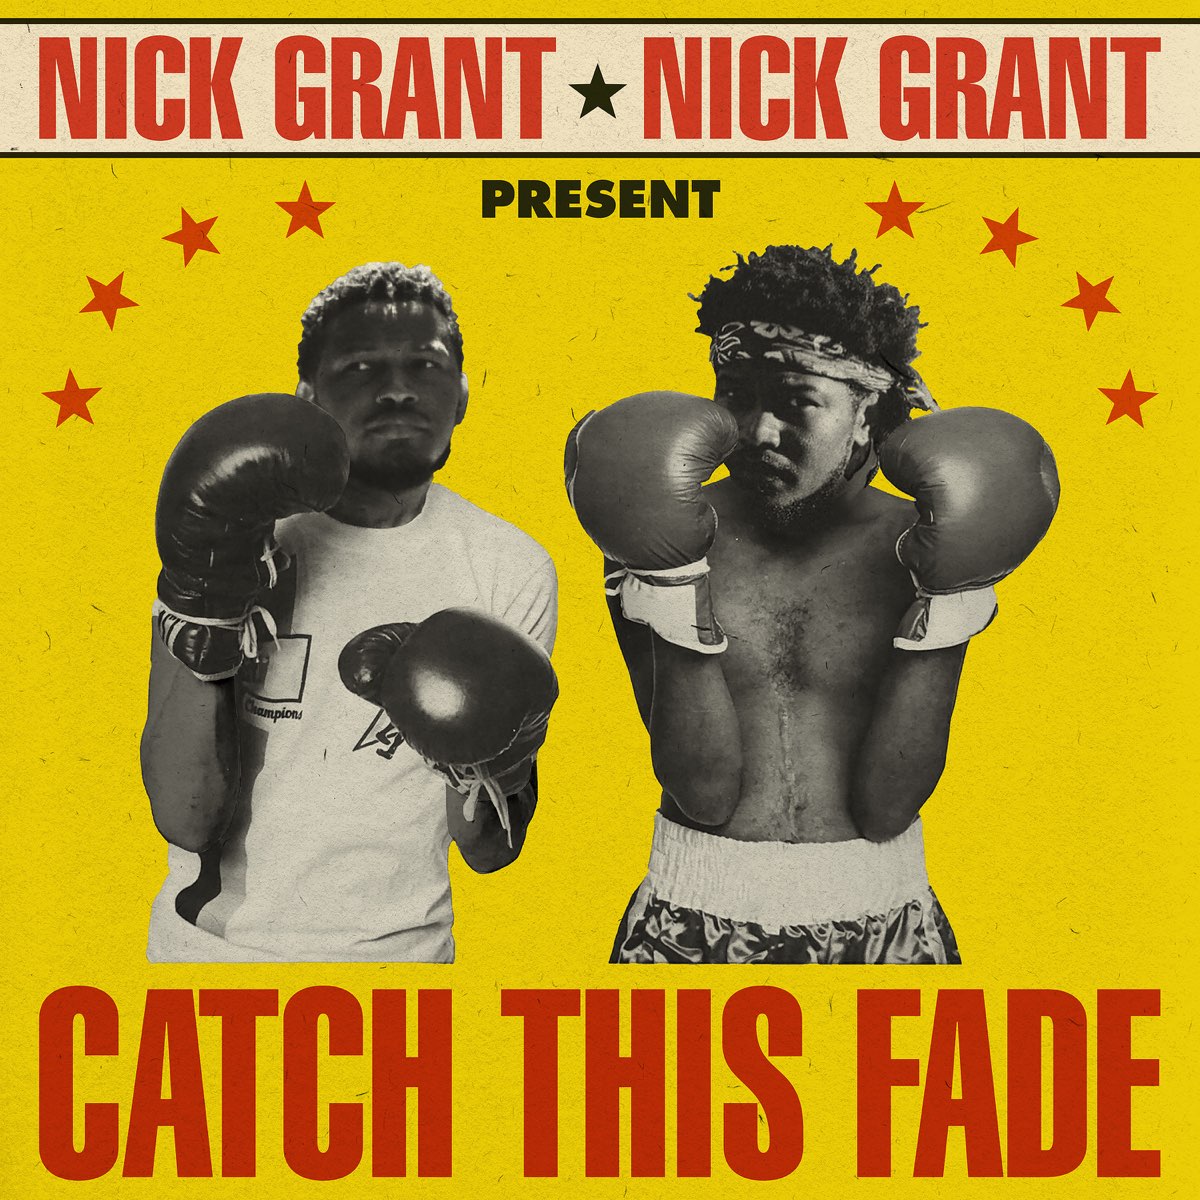 Catch This Fade - Single - Album by Nick Grant